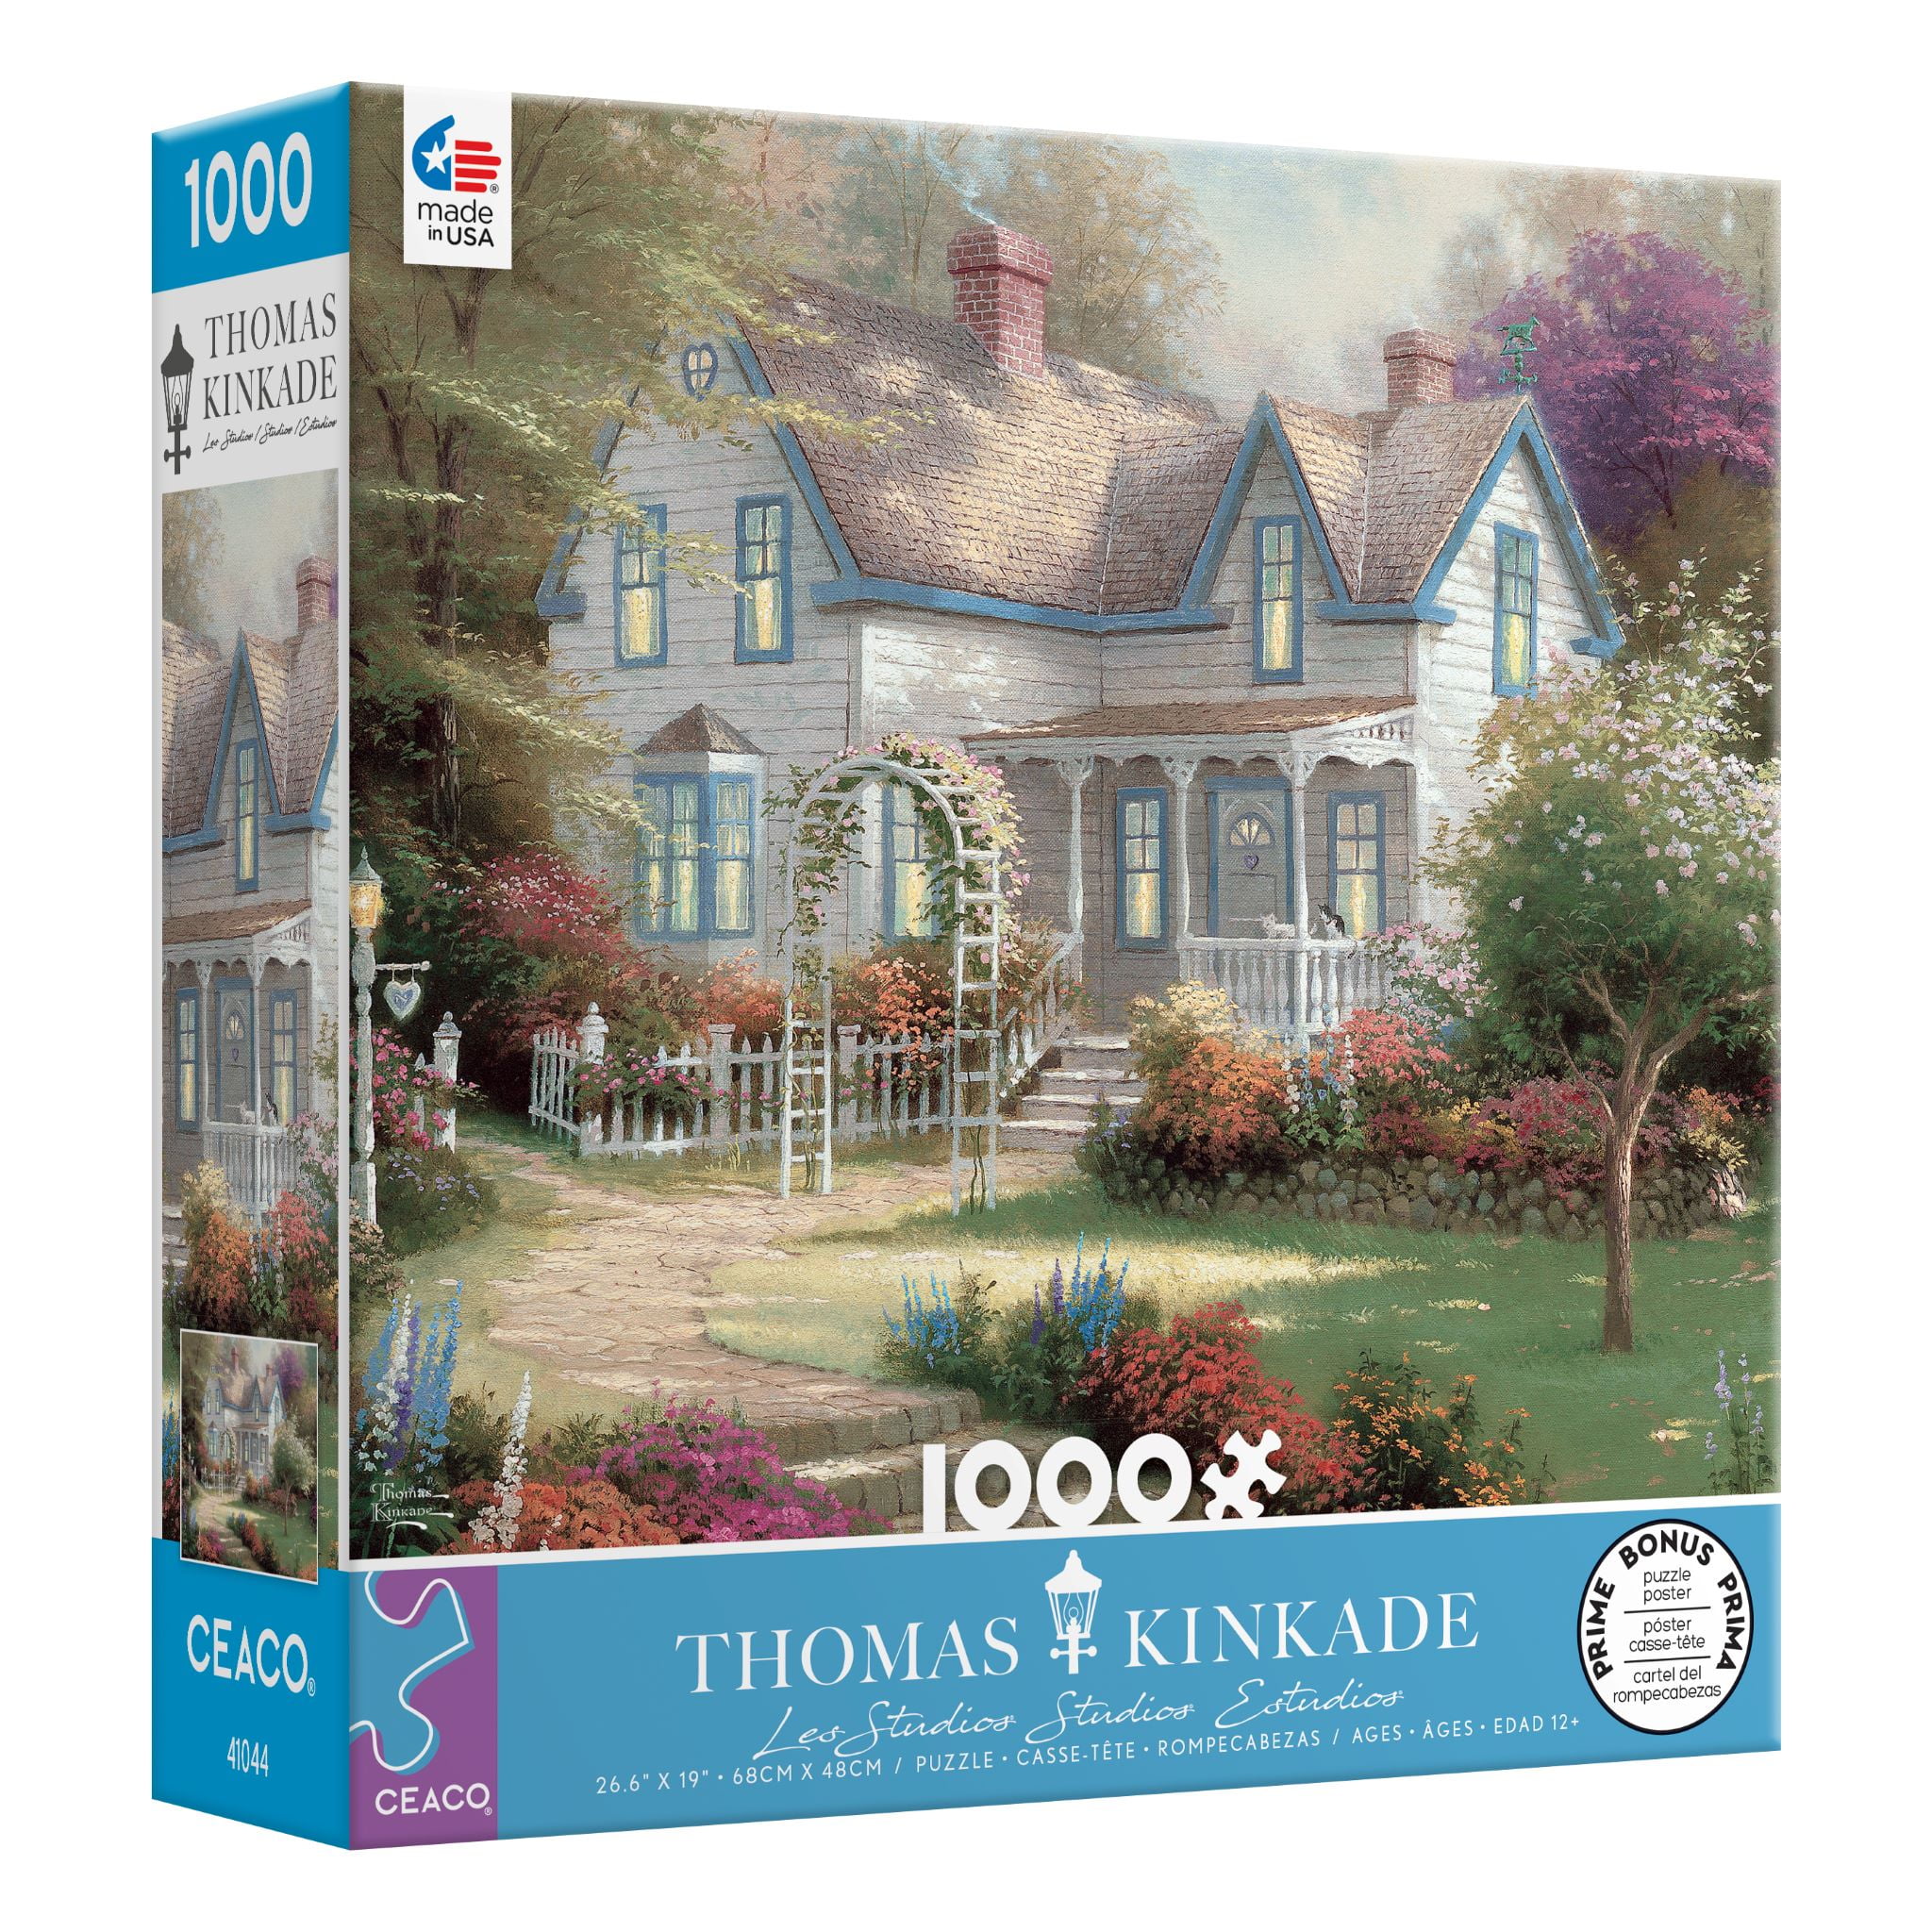 HOUSE OF PUZZLES 1000 Piece Jigsaw Puzzles MULTI LISTING CHOOSE YOUR OWN 